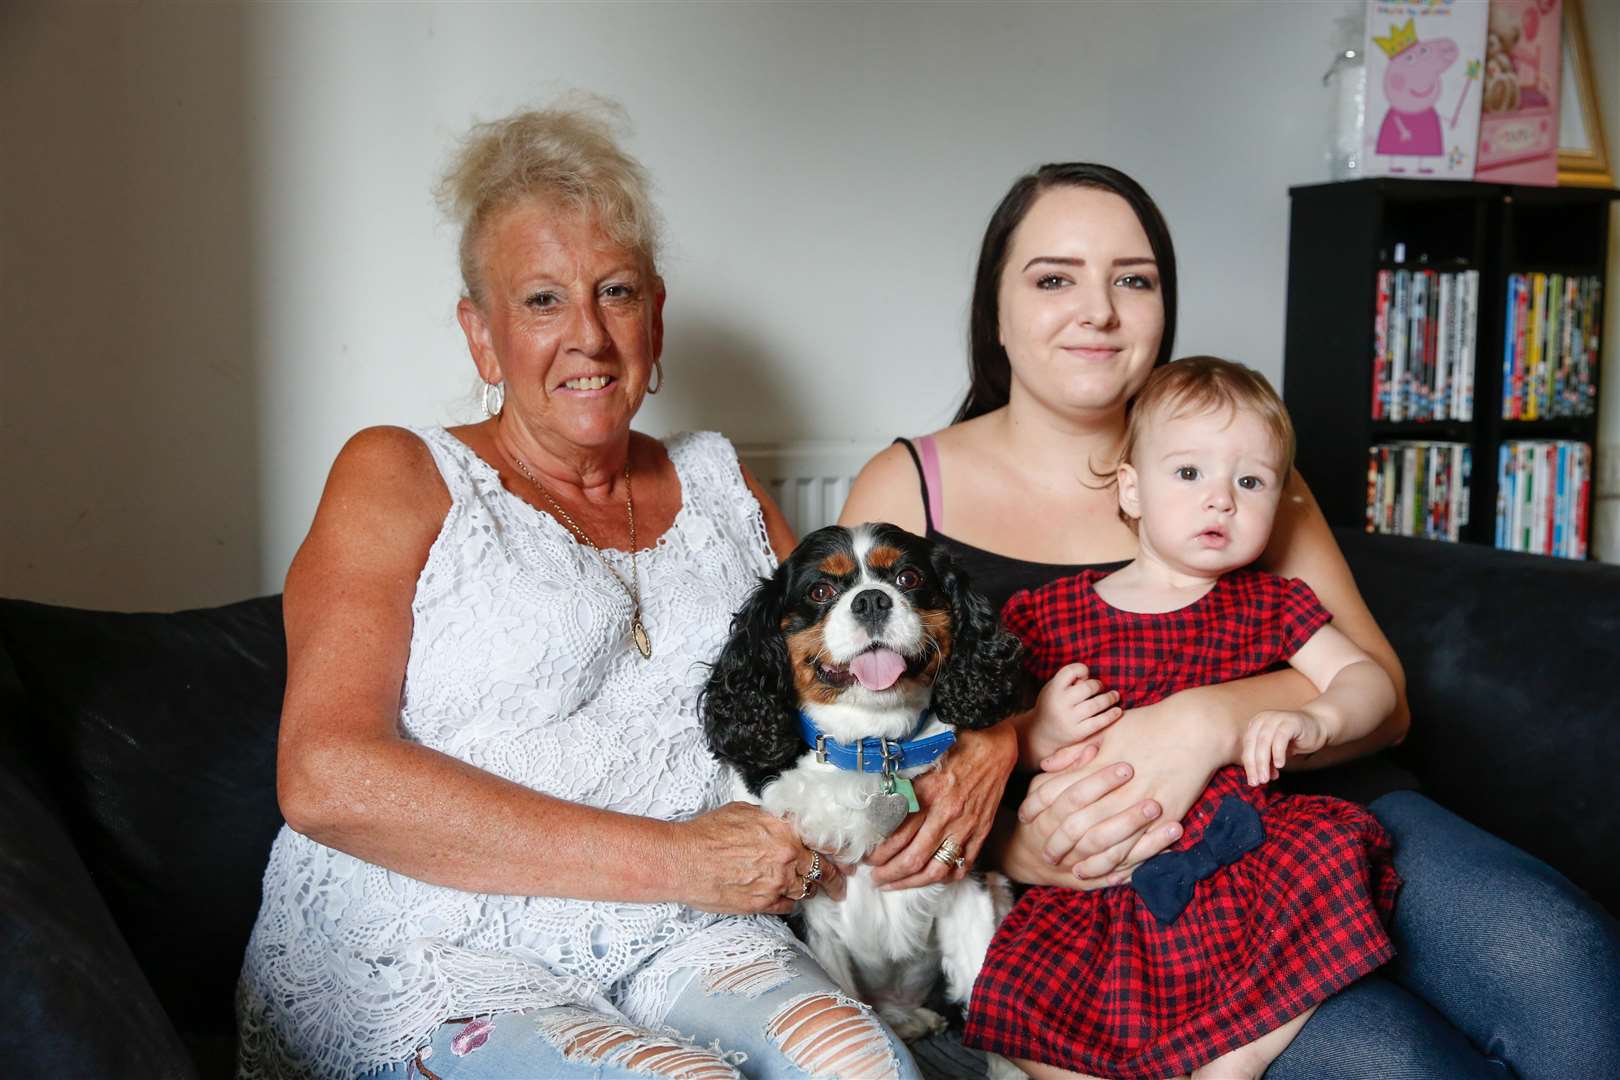 Shannon Weeks with daughter Chloe Showell, 1, and great grandmother Maureen Tarrant. Their dog Louie the King Charles Cavalier raised the alarm by barking